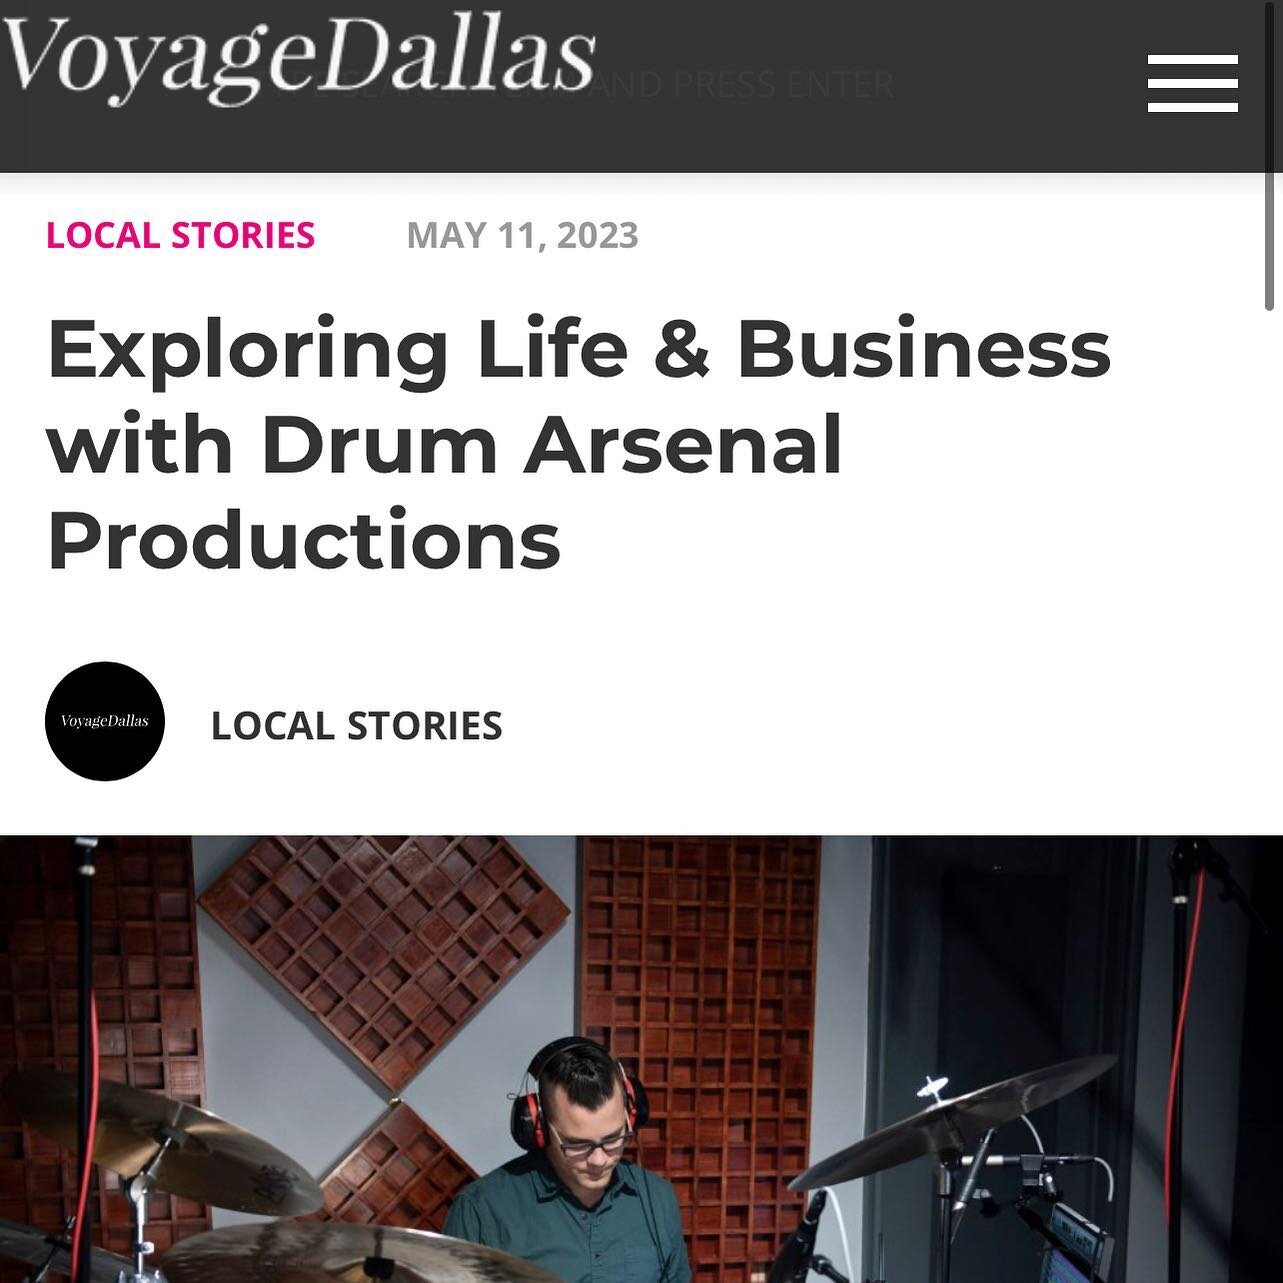 Got to sit down with Voyage Dallas Magazine and talk about the studio, running a business, and the ups and downs of the helping people from around the world make music. 

Thanks Voyage!

Full interview in bio ➡️